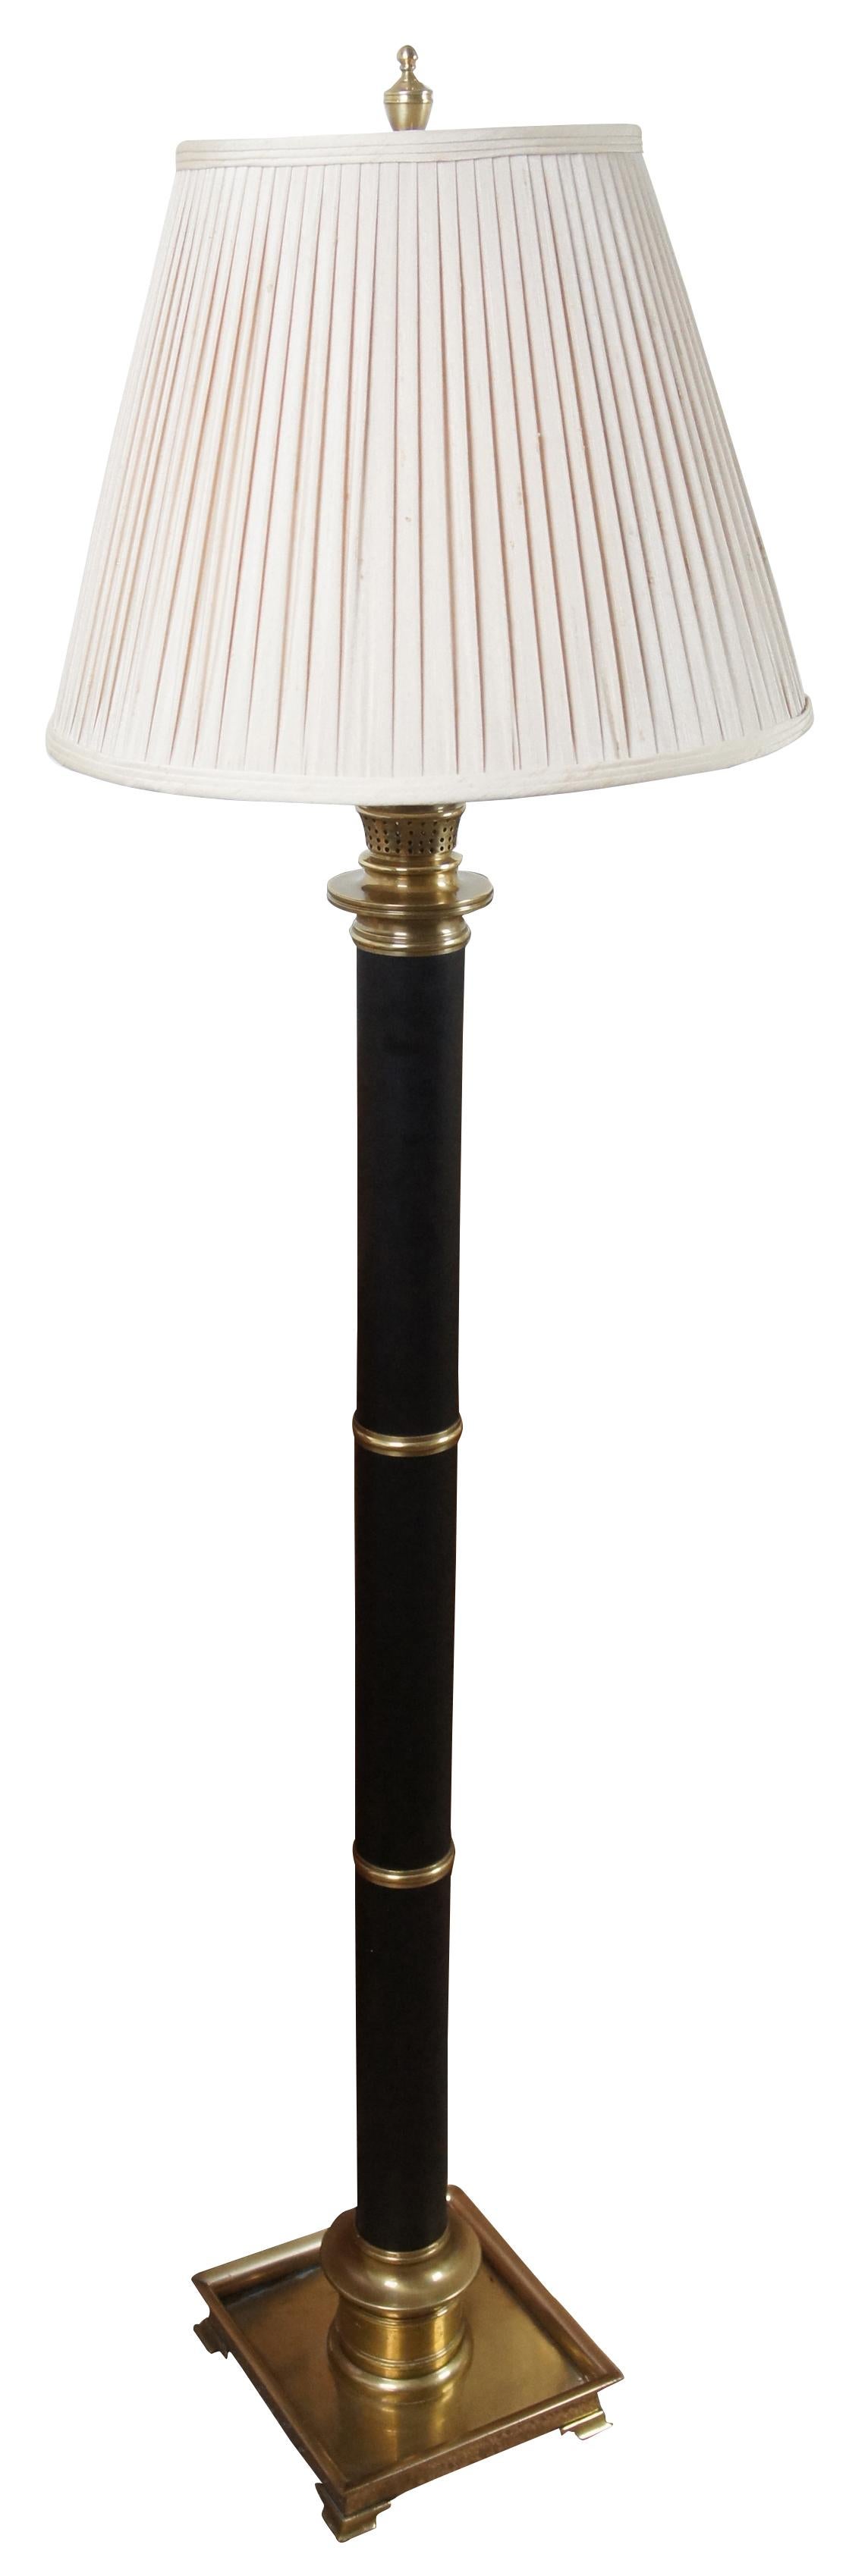 Vintage Frederick Cooper floor lamp with a square brass base supporting a black body and oil lamp style top. This gorgeous lamp drawer inspiration from iconic French Empire and Regency lighting.
   
9” x 9” x 51” / Shade - 18.5” x 12.5” / Height